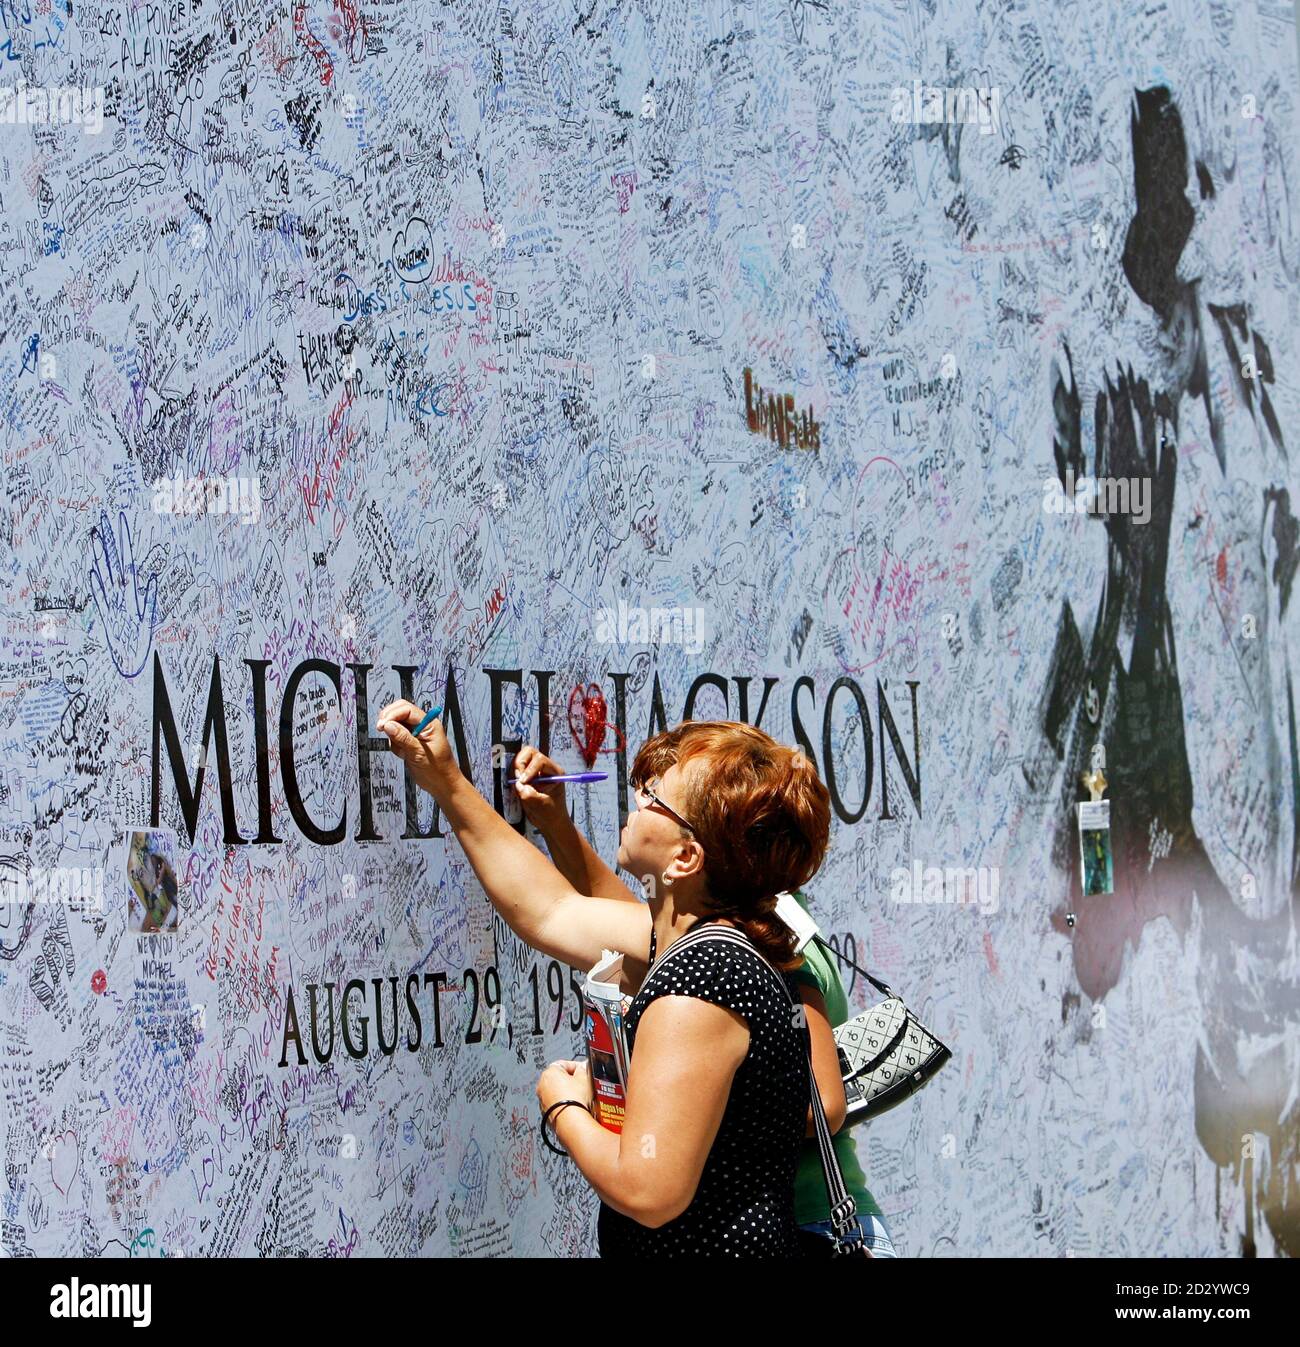 Fans sign a large Michael Jackson poster outside Staples Center in Los  Angeles July 6, 2009. The memorial for the pop star will be held at Staples  Center in Los Angeles July